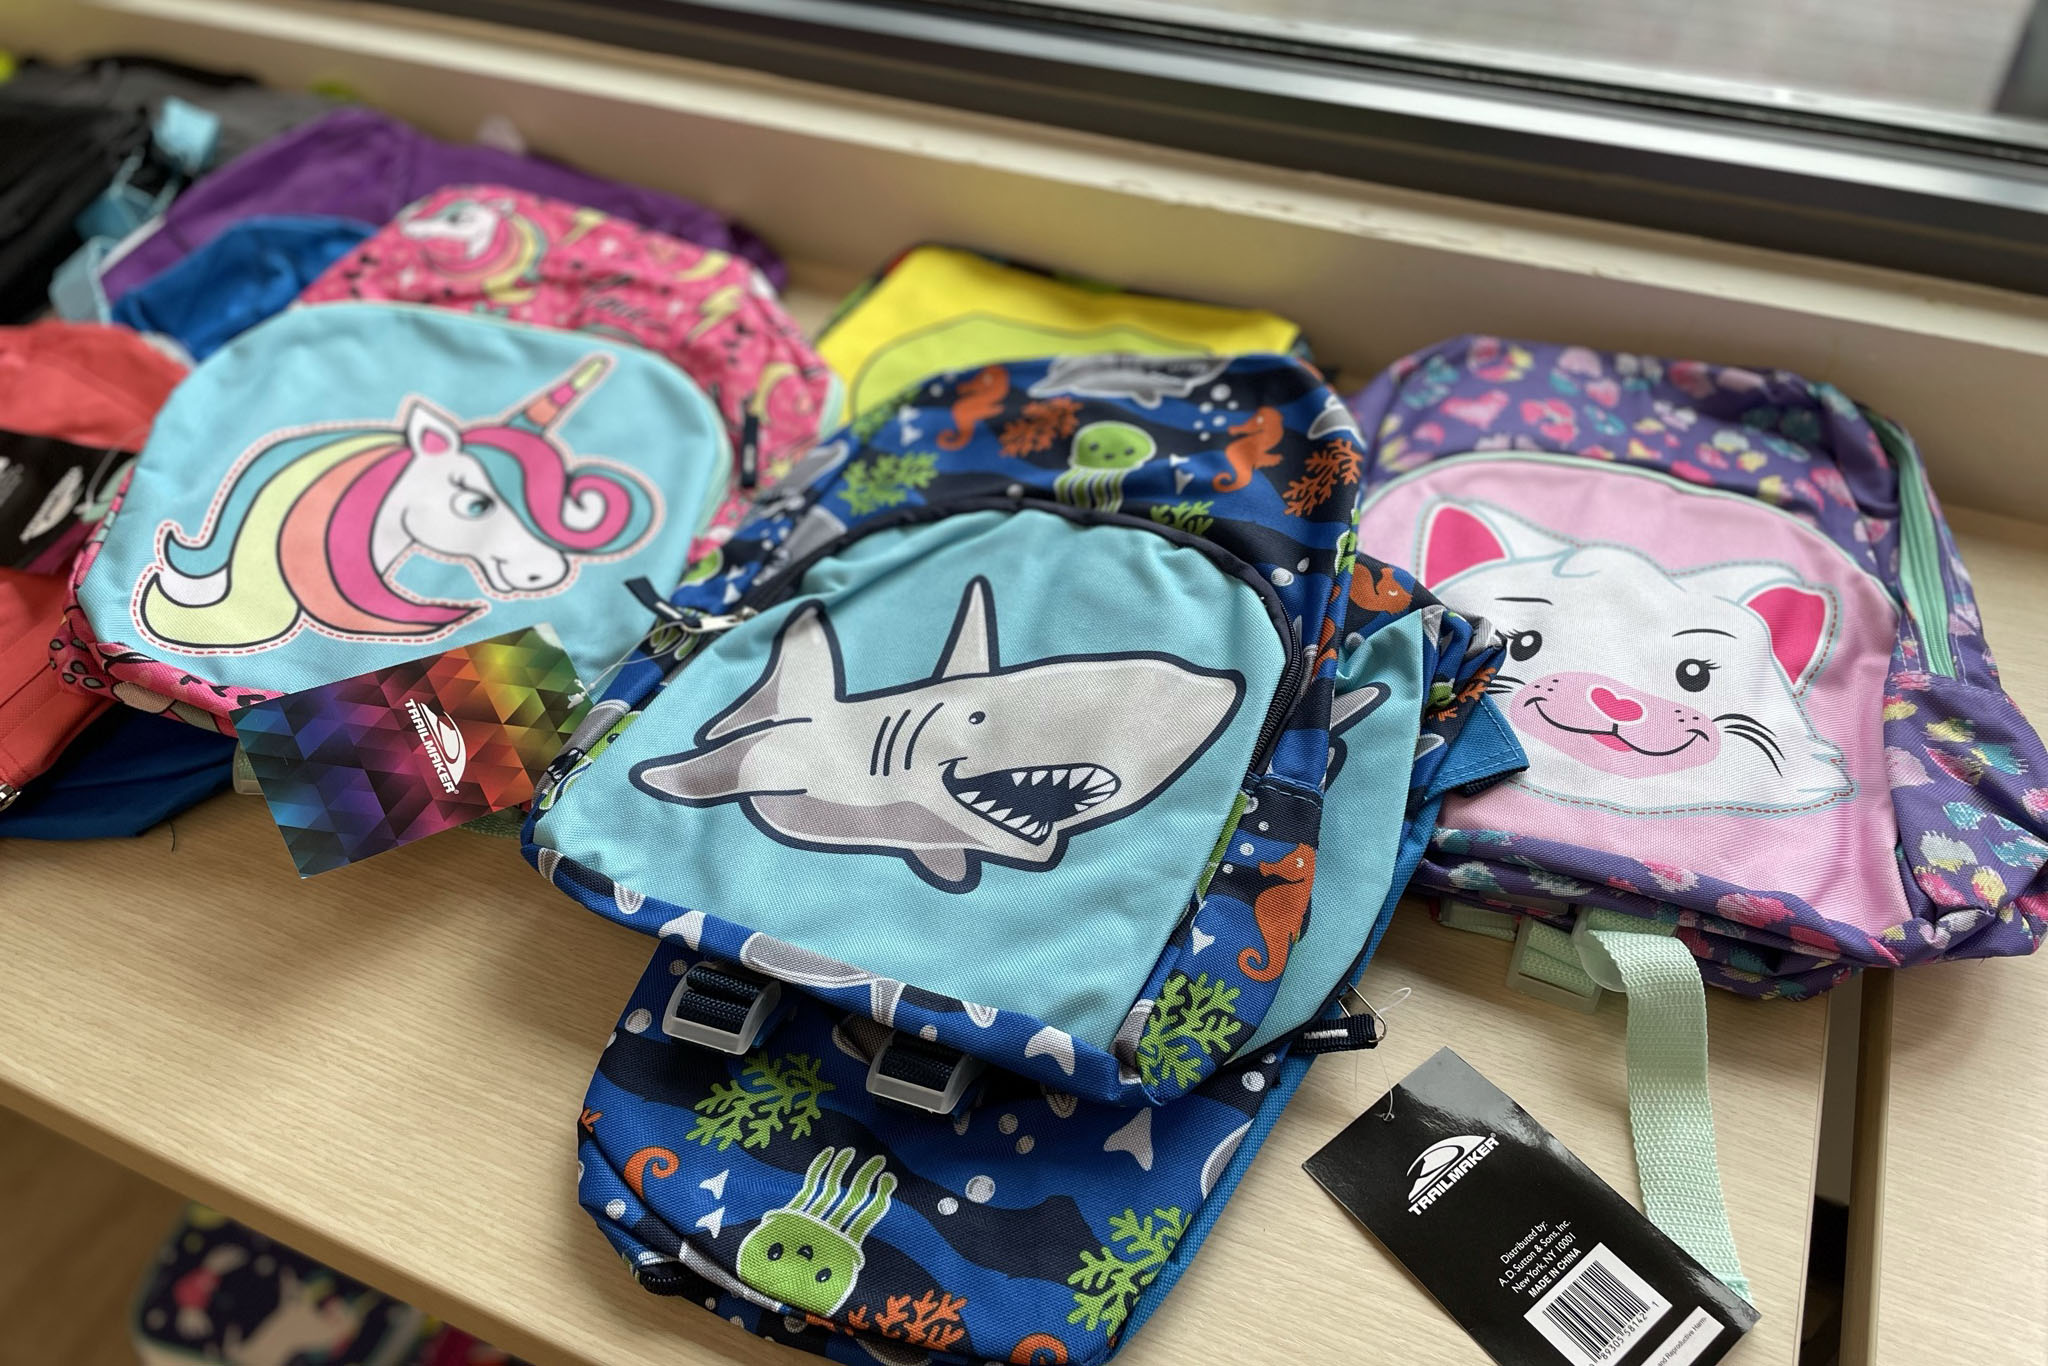 Children's backpacks laid out on a table, including ones with a cartoon shark, unicorn and cat